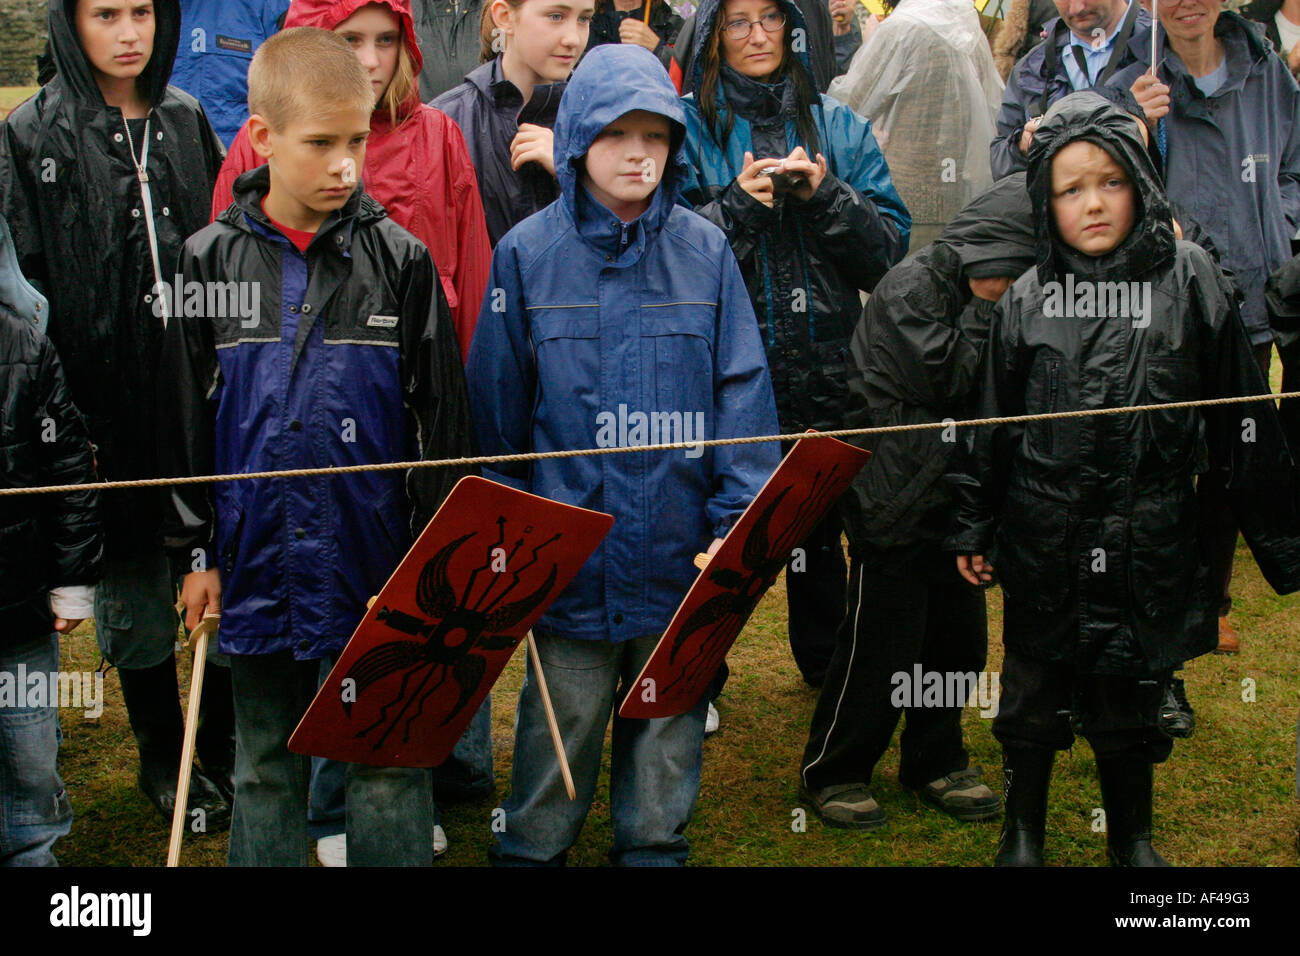 An audience at a Roman re enactment event wait for performers in the rain Stock Photo